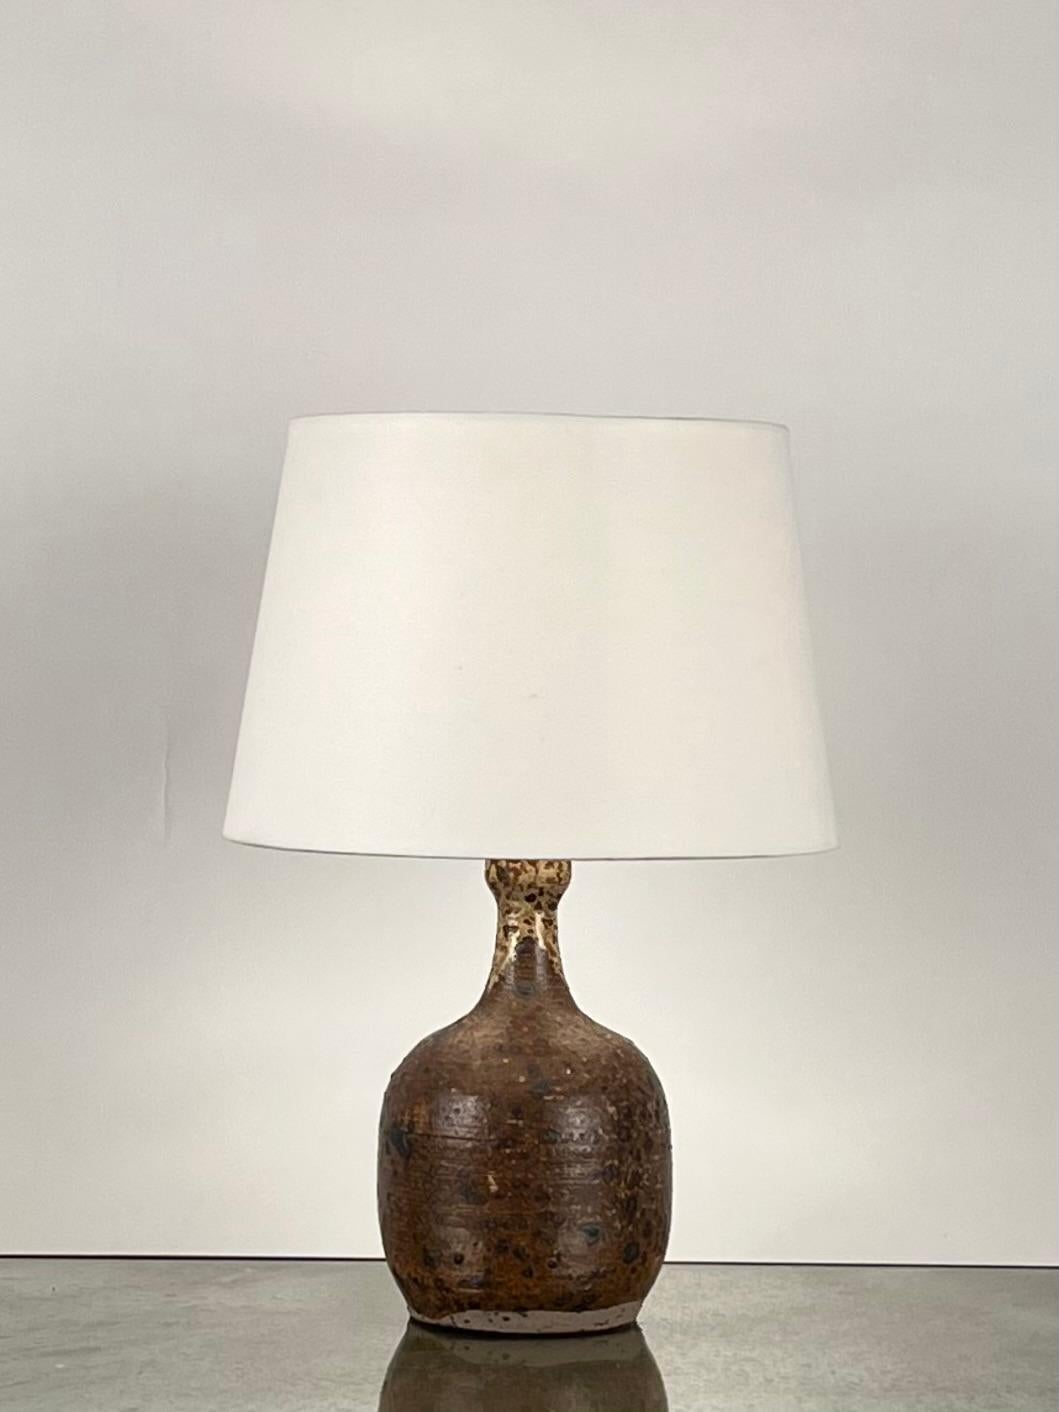 Grès Pyrité Stoneware Glazed Lamp by La Borne Pottery in France. 

Rewired with high-end twist cord and 3-way switch (on, half intensity, off). A 40w filament bulb is included in your order. 

Includes European style parchment shade (no harp or